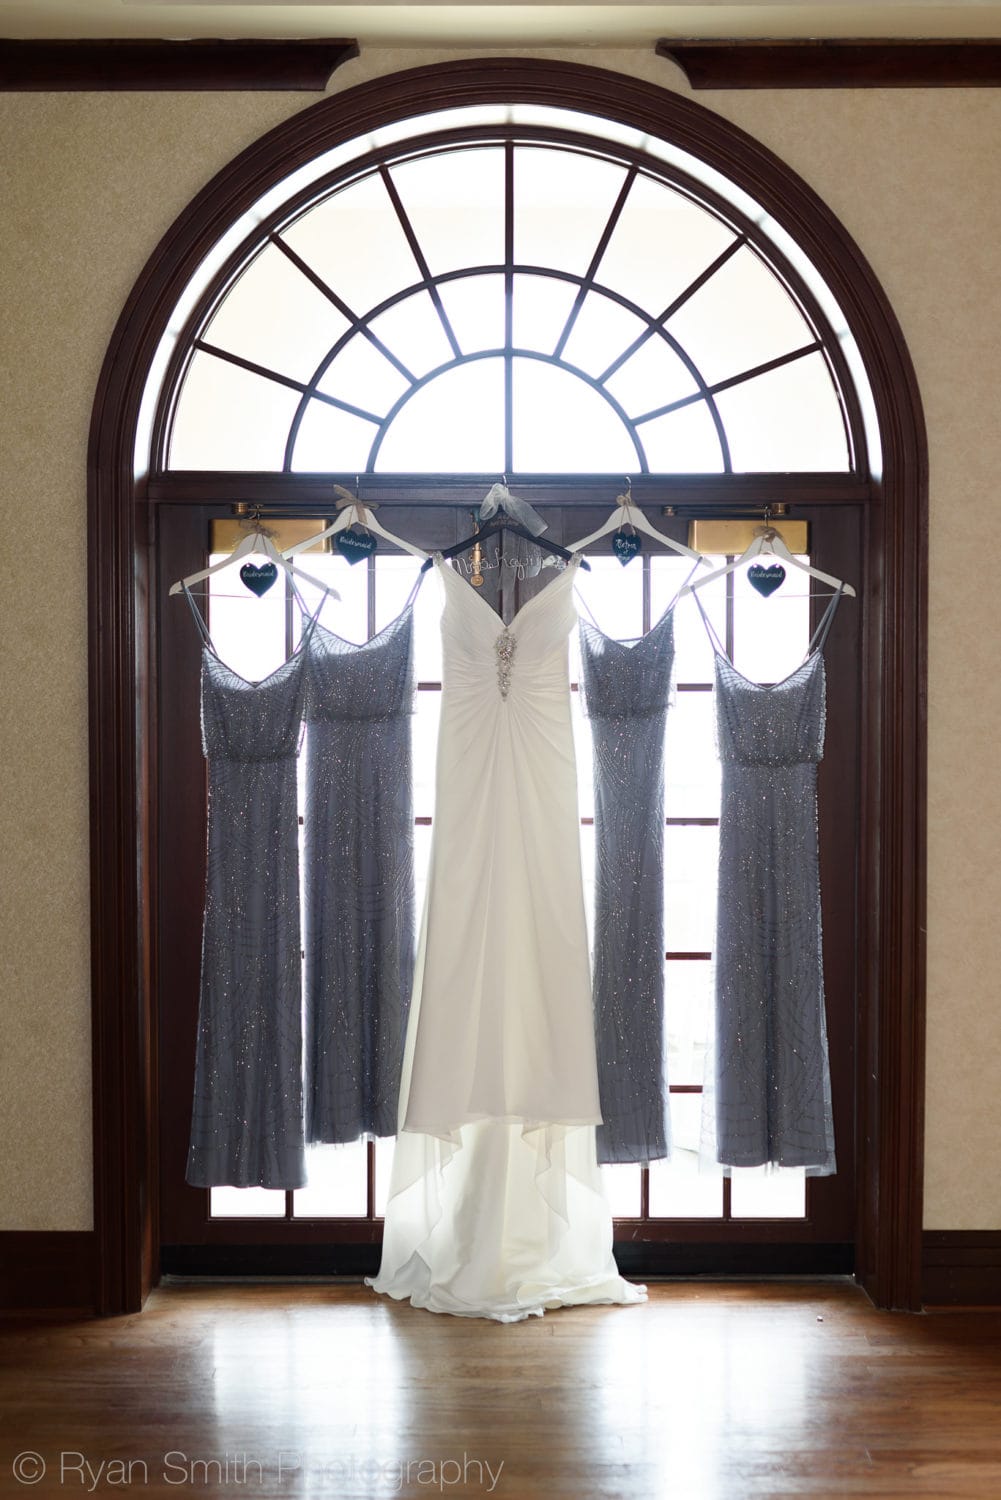 Dresses together by the window - Grande Dunes Ocean Club